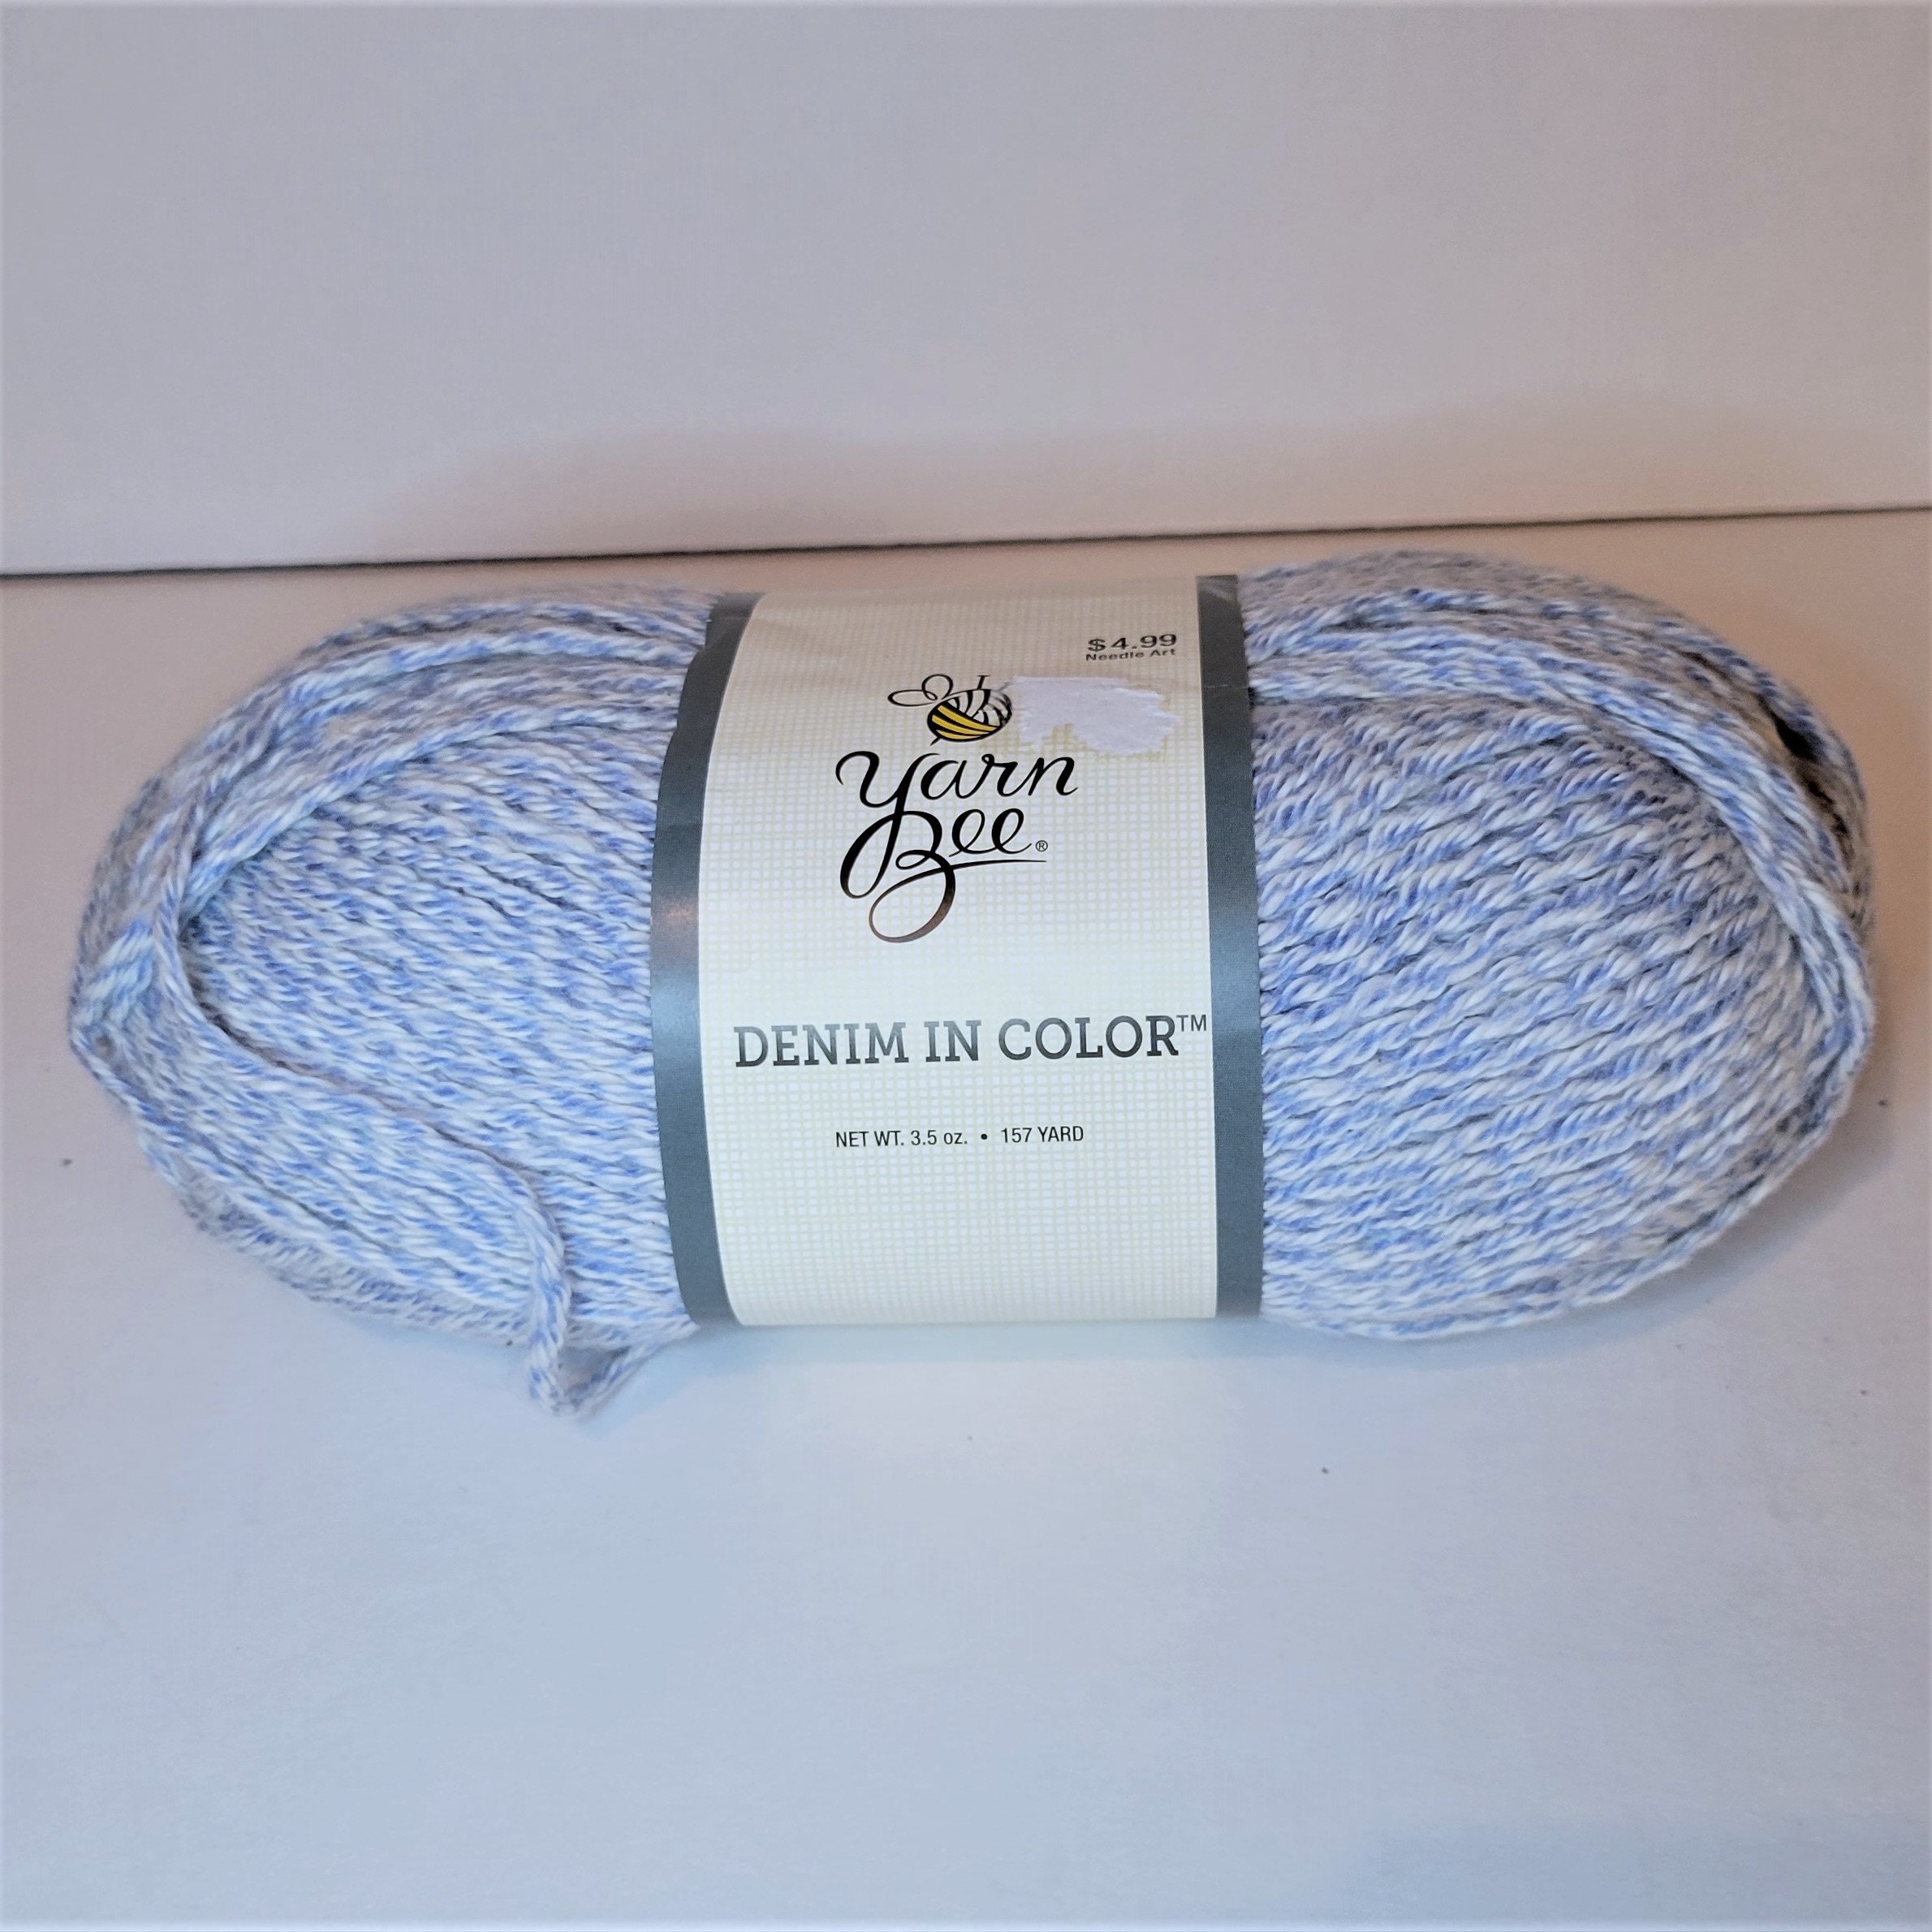 Hobby Lobby, Office, Yarn Bee Eternal Bliss Yarn Teal 5 Skeins 4 More  Available